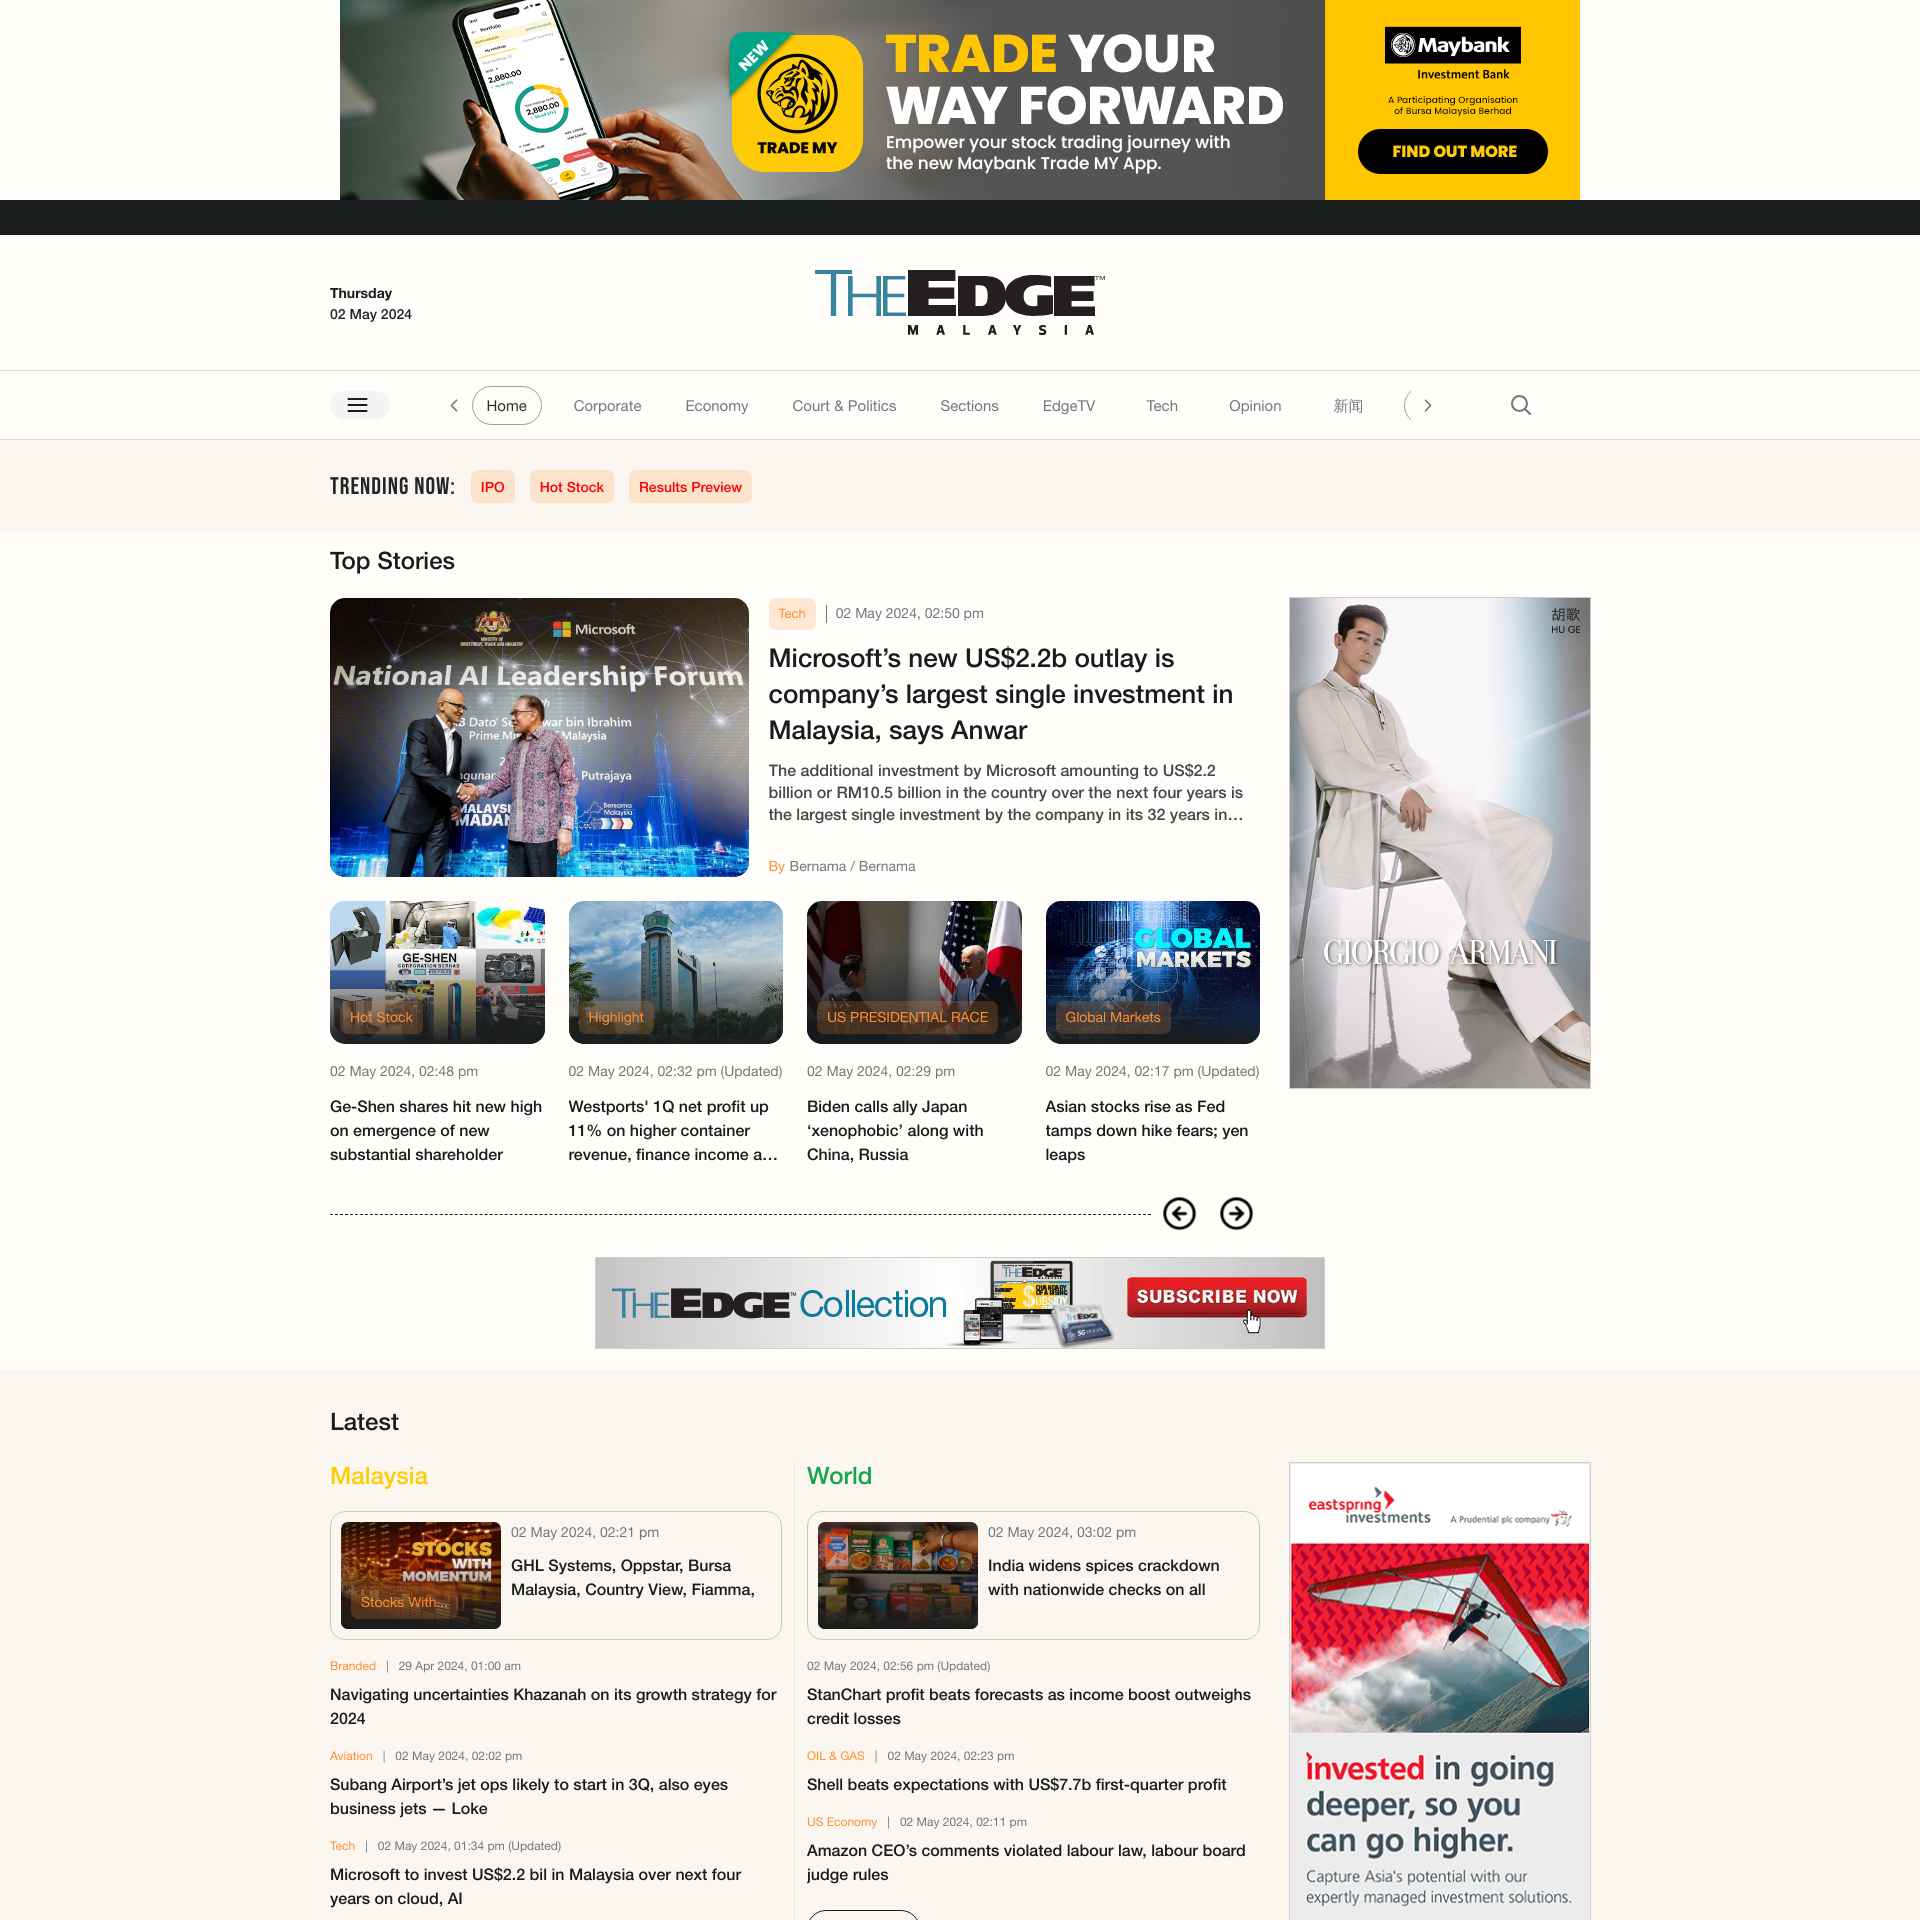 “The Edge Markets: Your Go-To Source for Comprehensive Financial News”